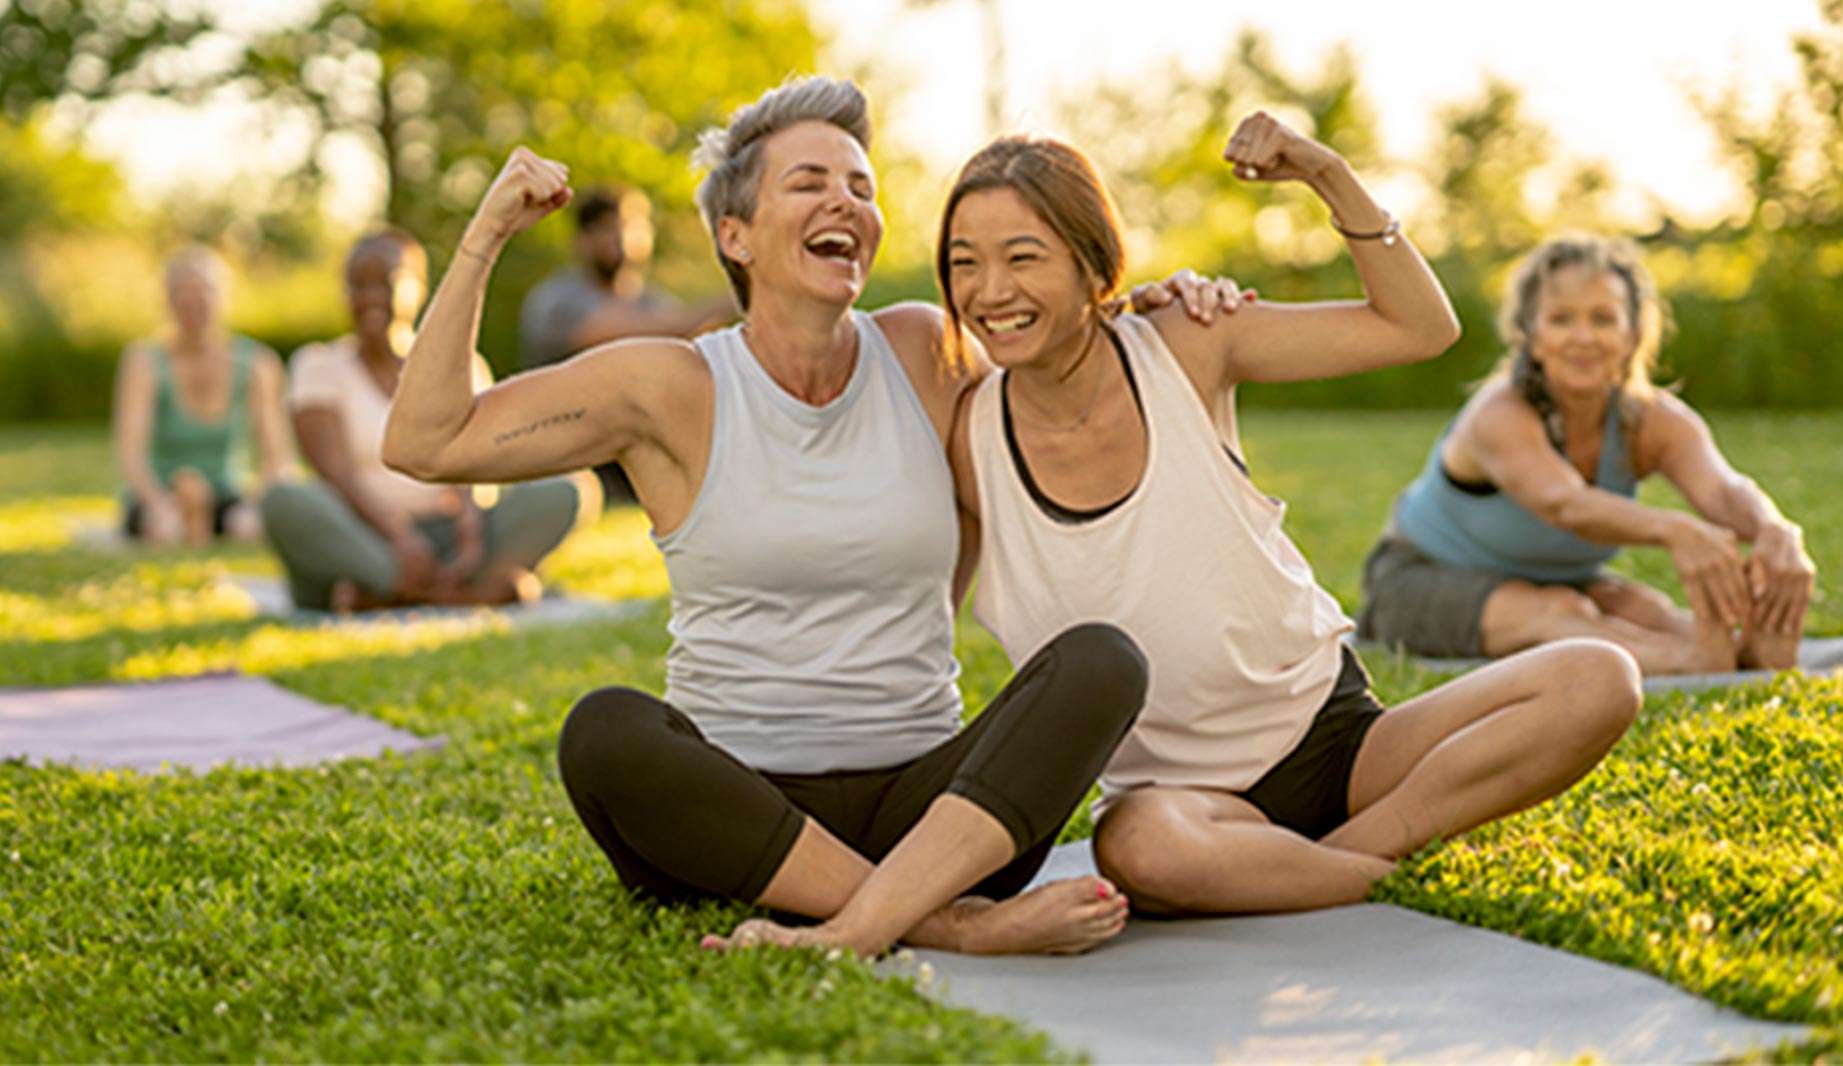 female presenting persons sitting on a yoga mat smiling and flexing their arms